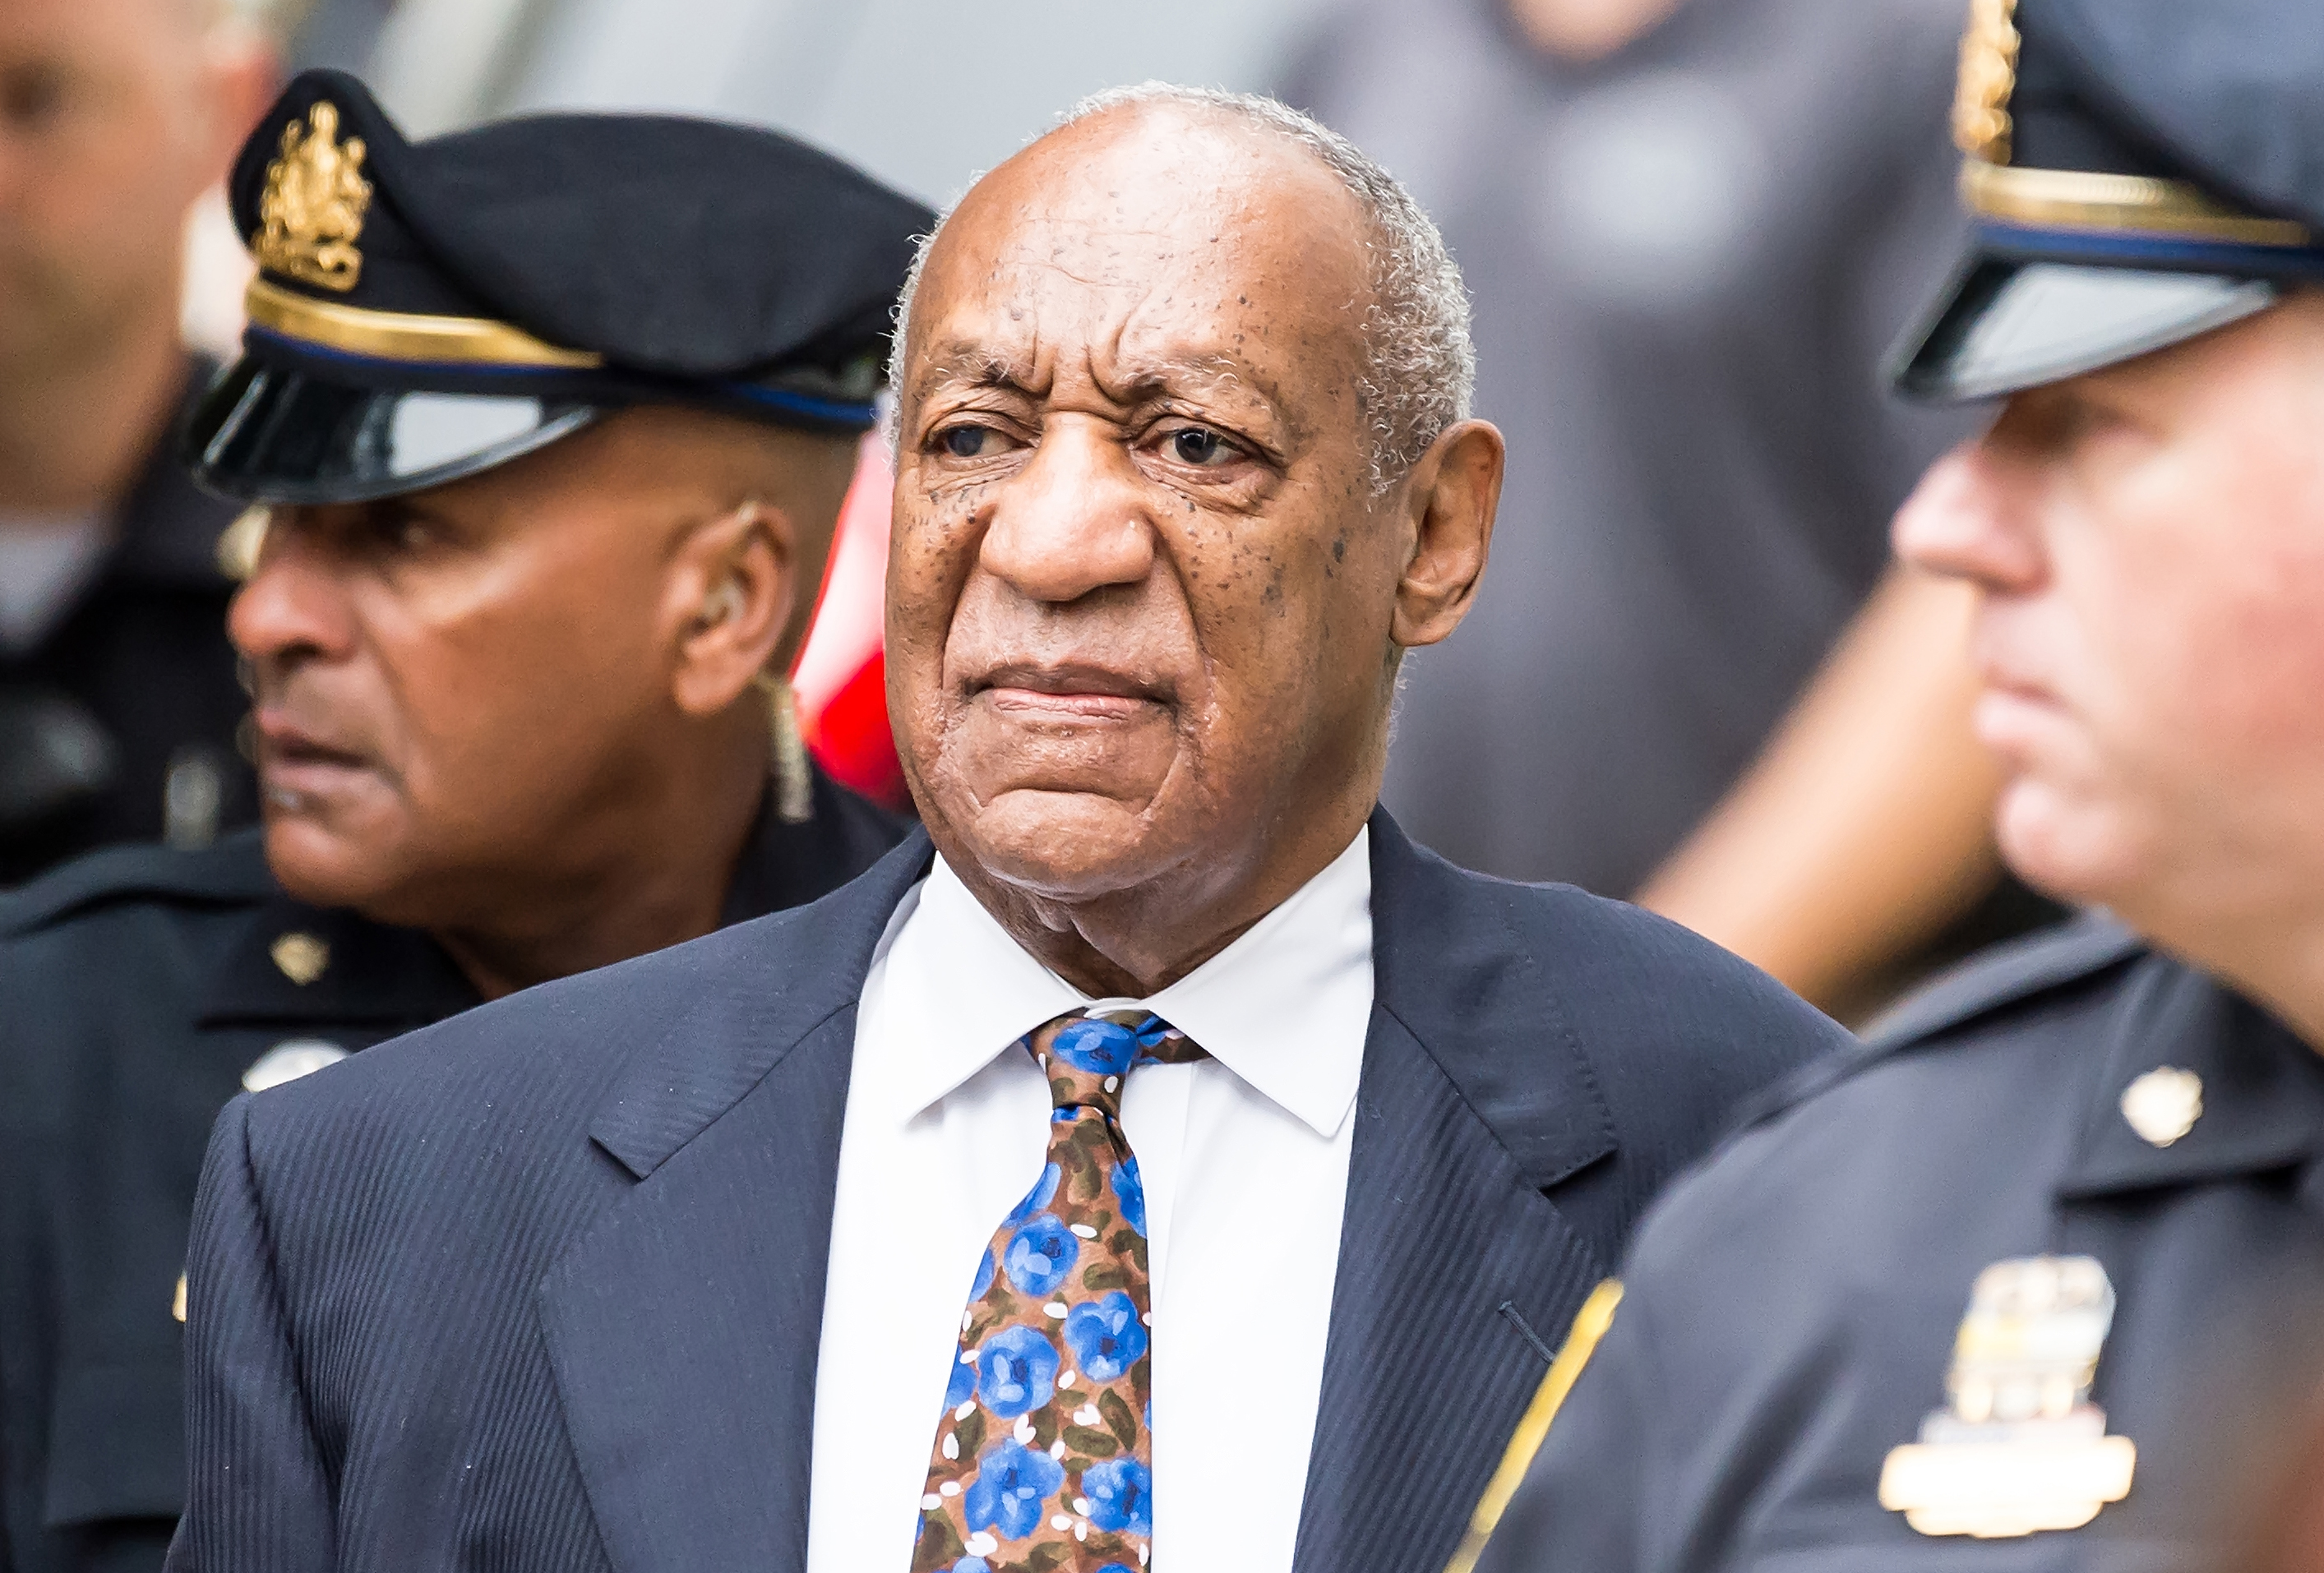 Bill Cosby arrives at the Montgomery County Courthouse on September 24, 2018 in Norristown, Pennsylvania. | Source: Getty Images